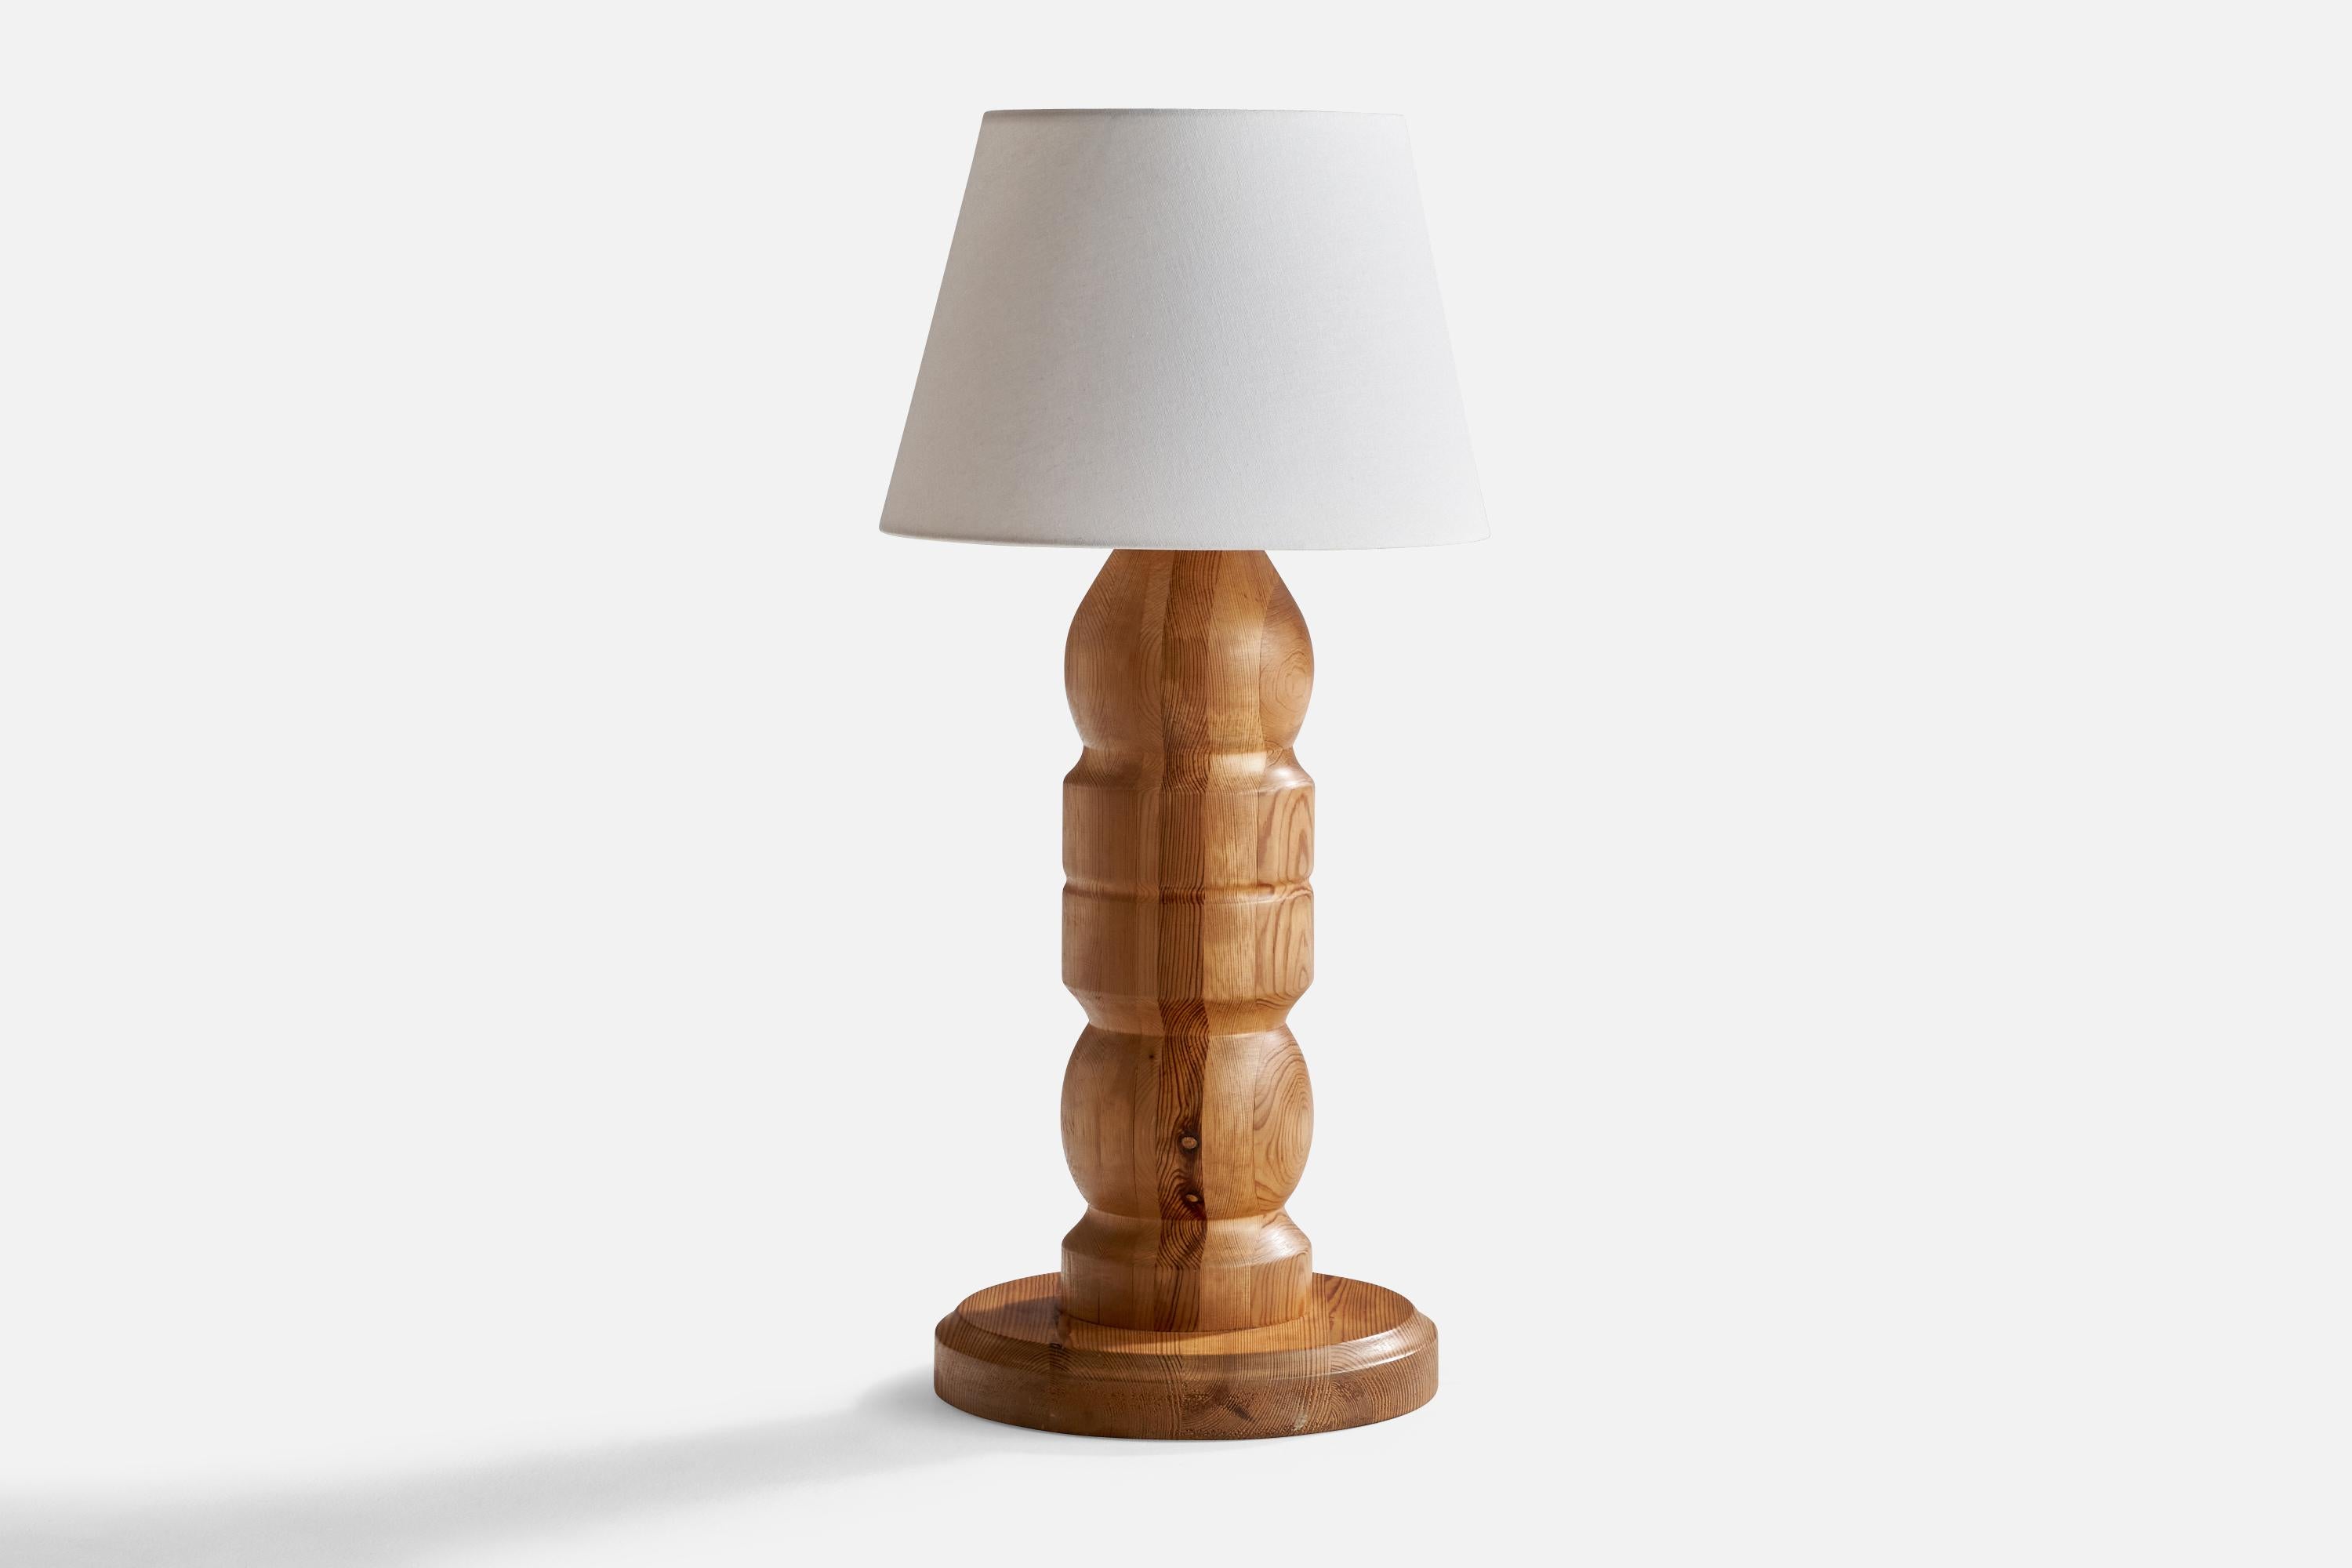 A large pine table lamp designed and produced in Sweden, c. 1960s.

Dimensions of Lamp (inches): 22.75” H x 11.5”Diameter
Dimensions of Shade (inches): 9.5” Top Diameter x 14